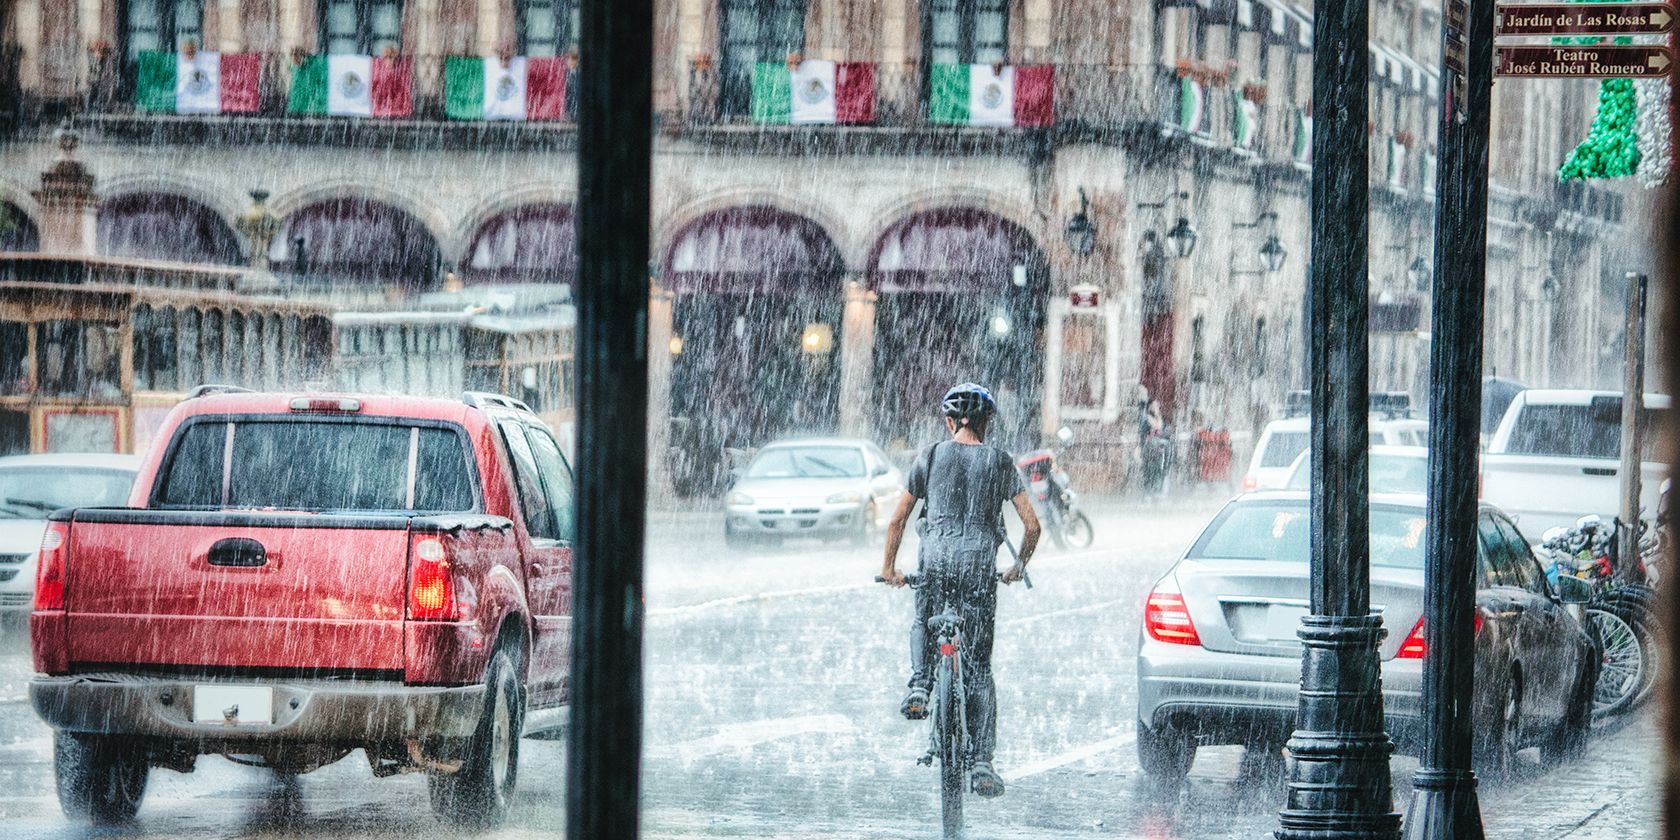 Person riding bicycle in the rain in traffic.